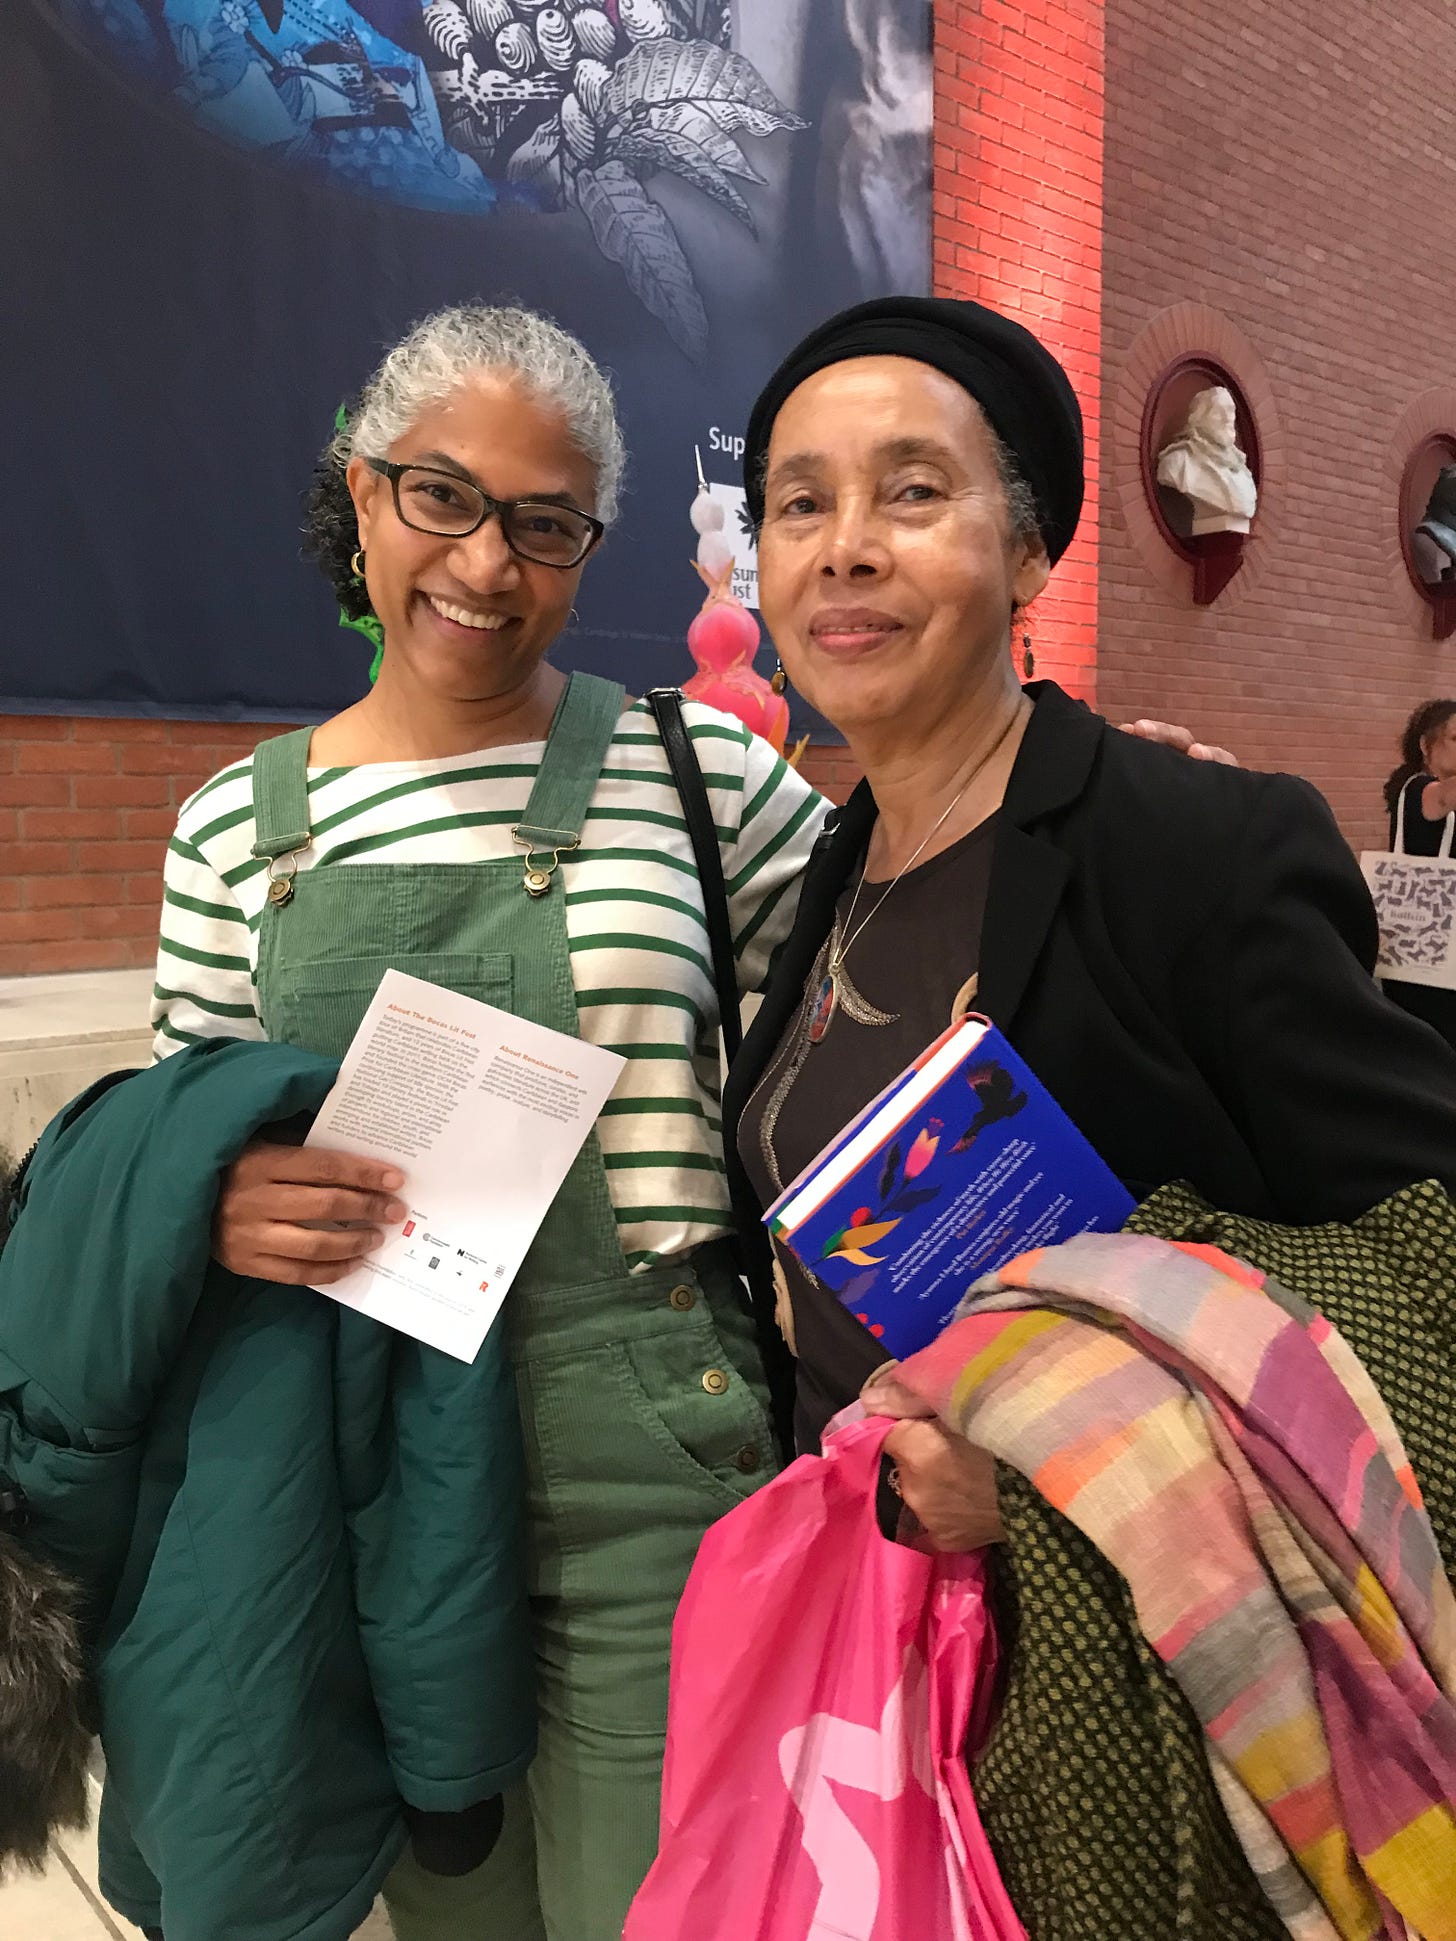 Grace Nichols, on the right, standing with Amanda Coreishy on the left, both holding their coats. Amanda is holding The Bocas UK Tour 2022 schedule and Grace is holding a copy of When We Were Birds